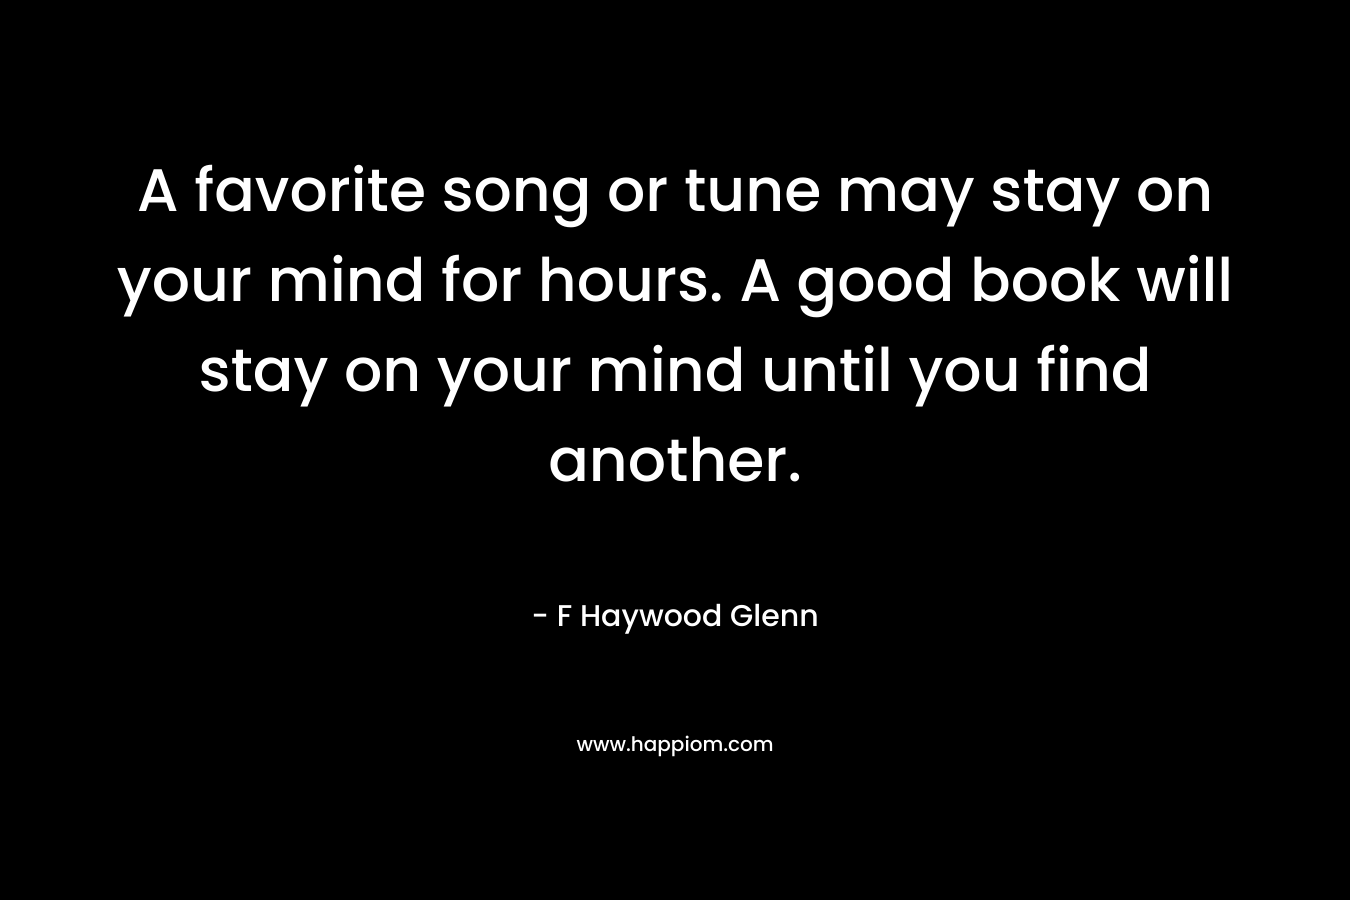 A favorite song or tune may stay on your mind for hours. A good book will stay on your mind until you find another. – F Haywood Glenn